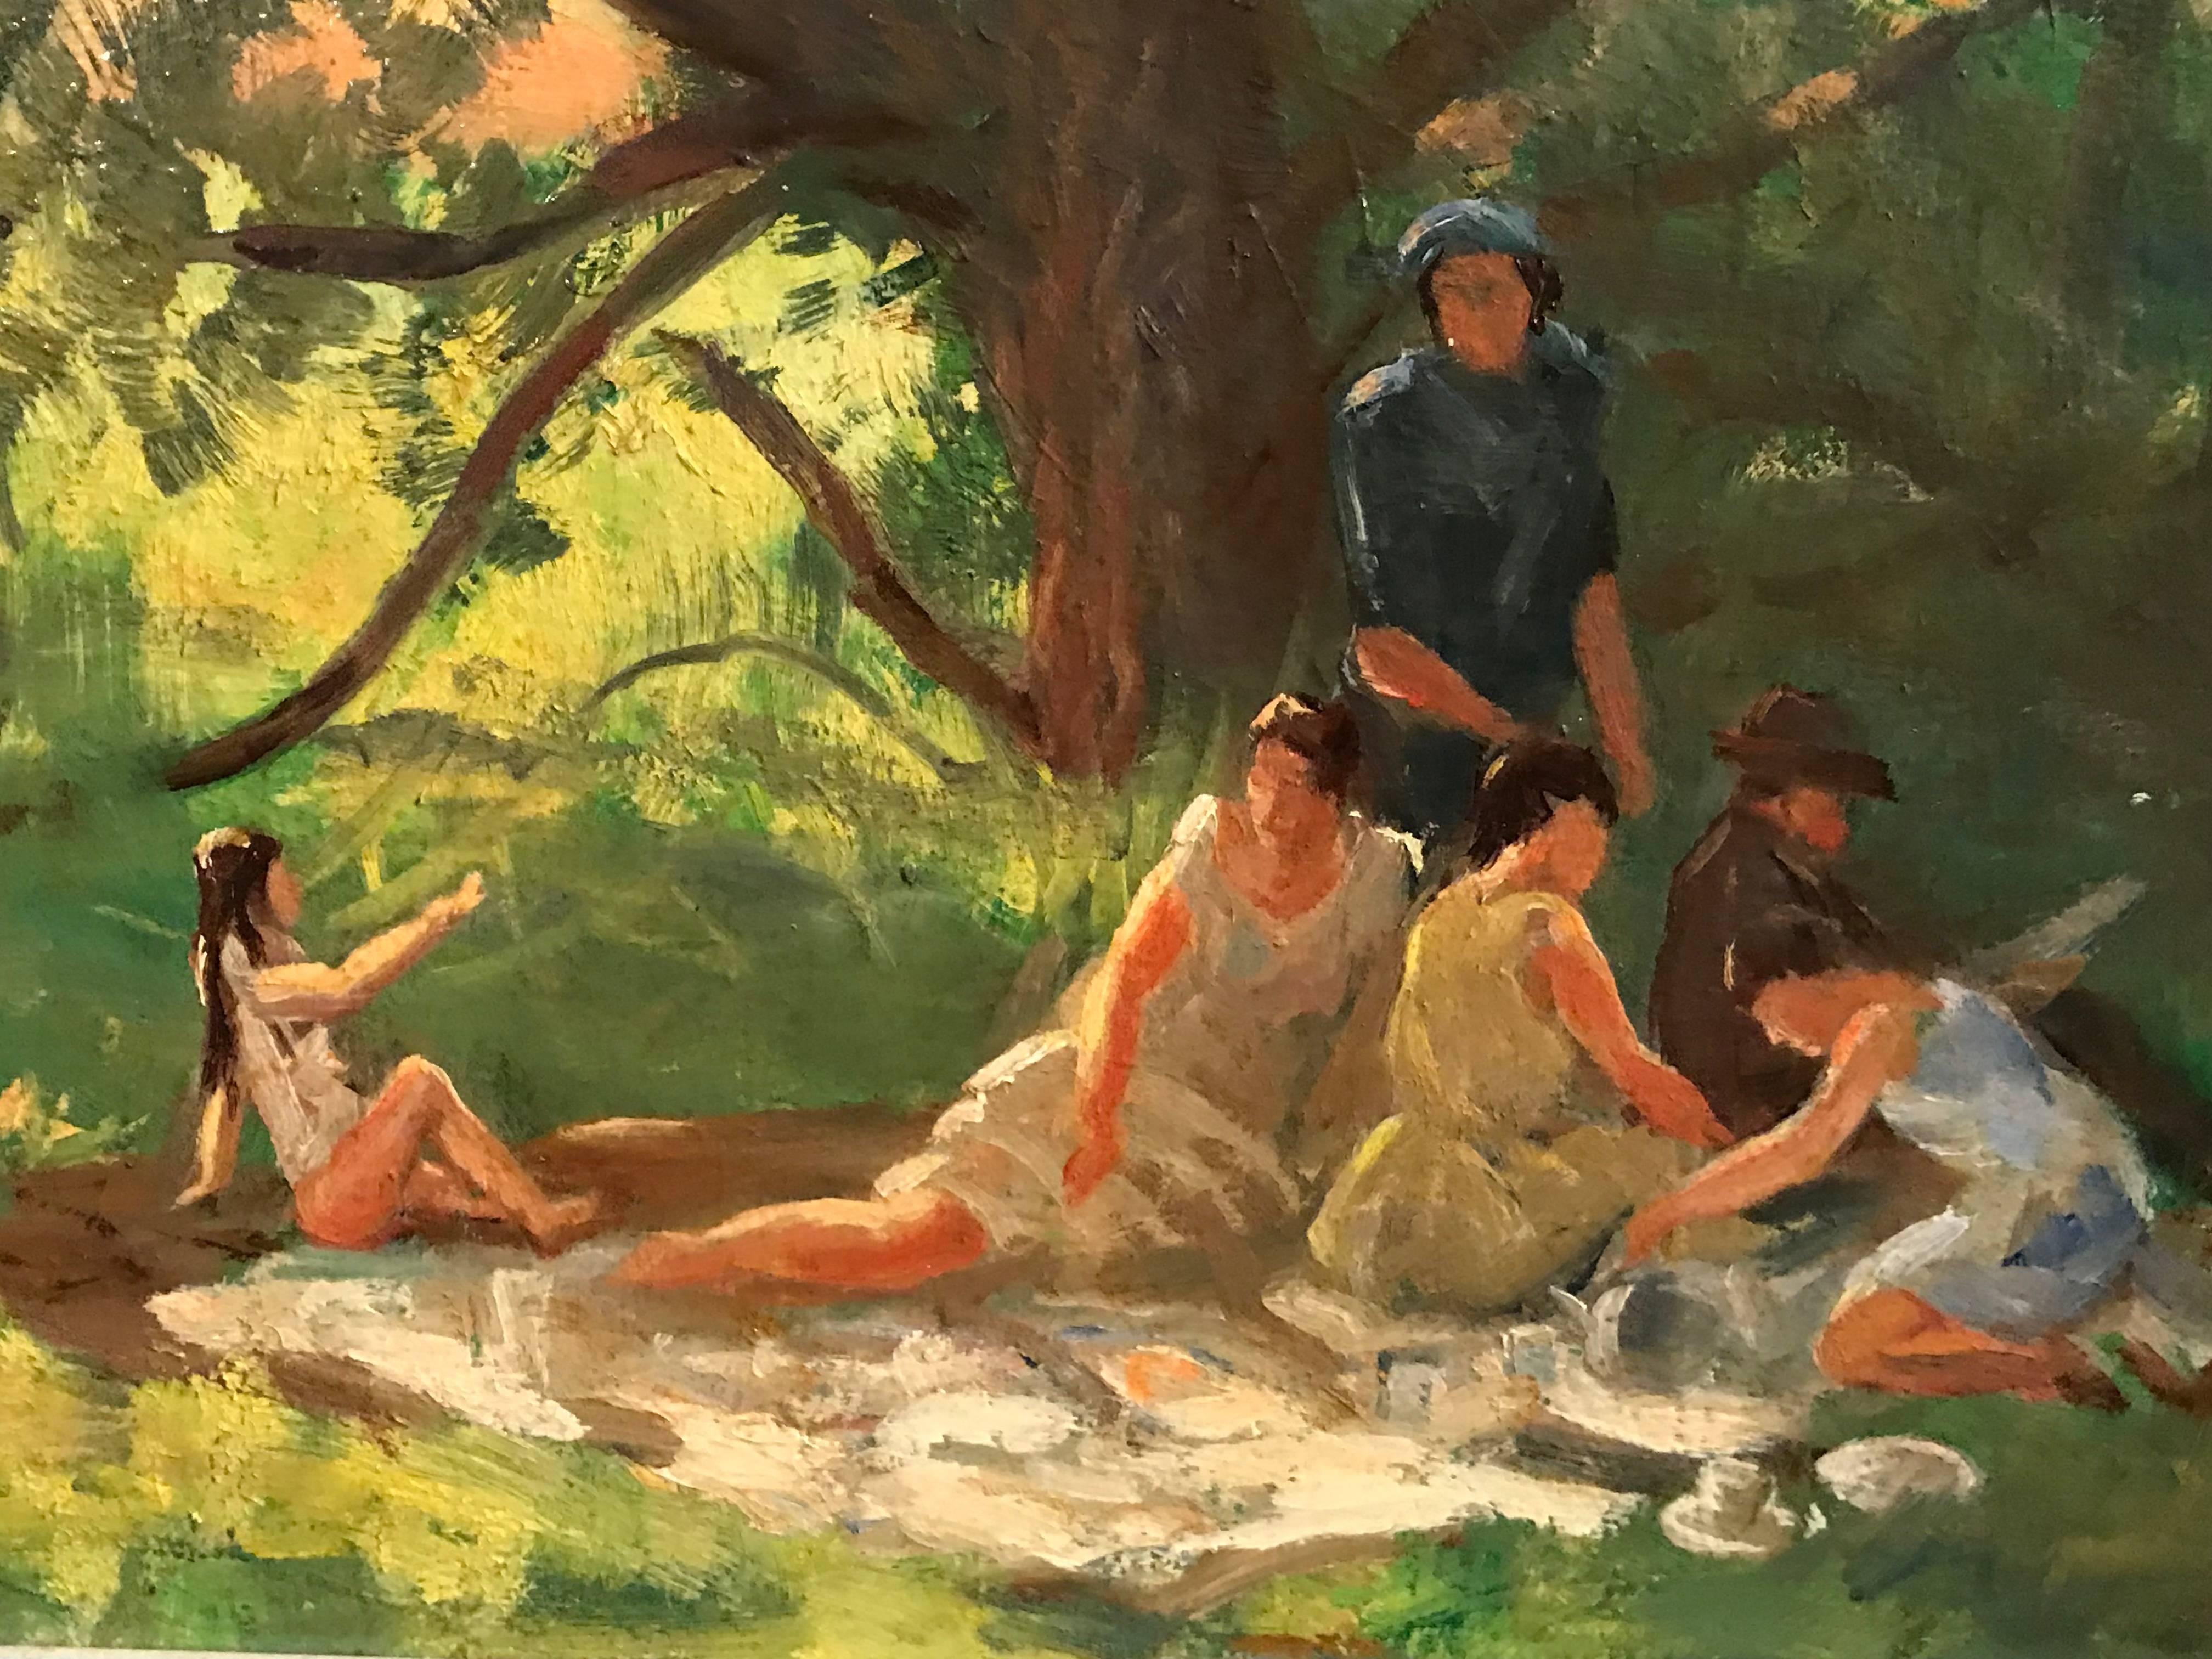 The Picnic
by Alfred Richard Blundell (British 1883-1968)
signed lower right, titled verso, dated 1954
oil painting on board, framed

framed size: 22 x 28 inches

Really lovely original oil painting by the well regarded British Impressionist